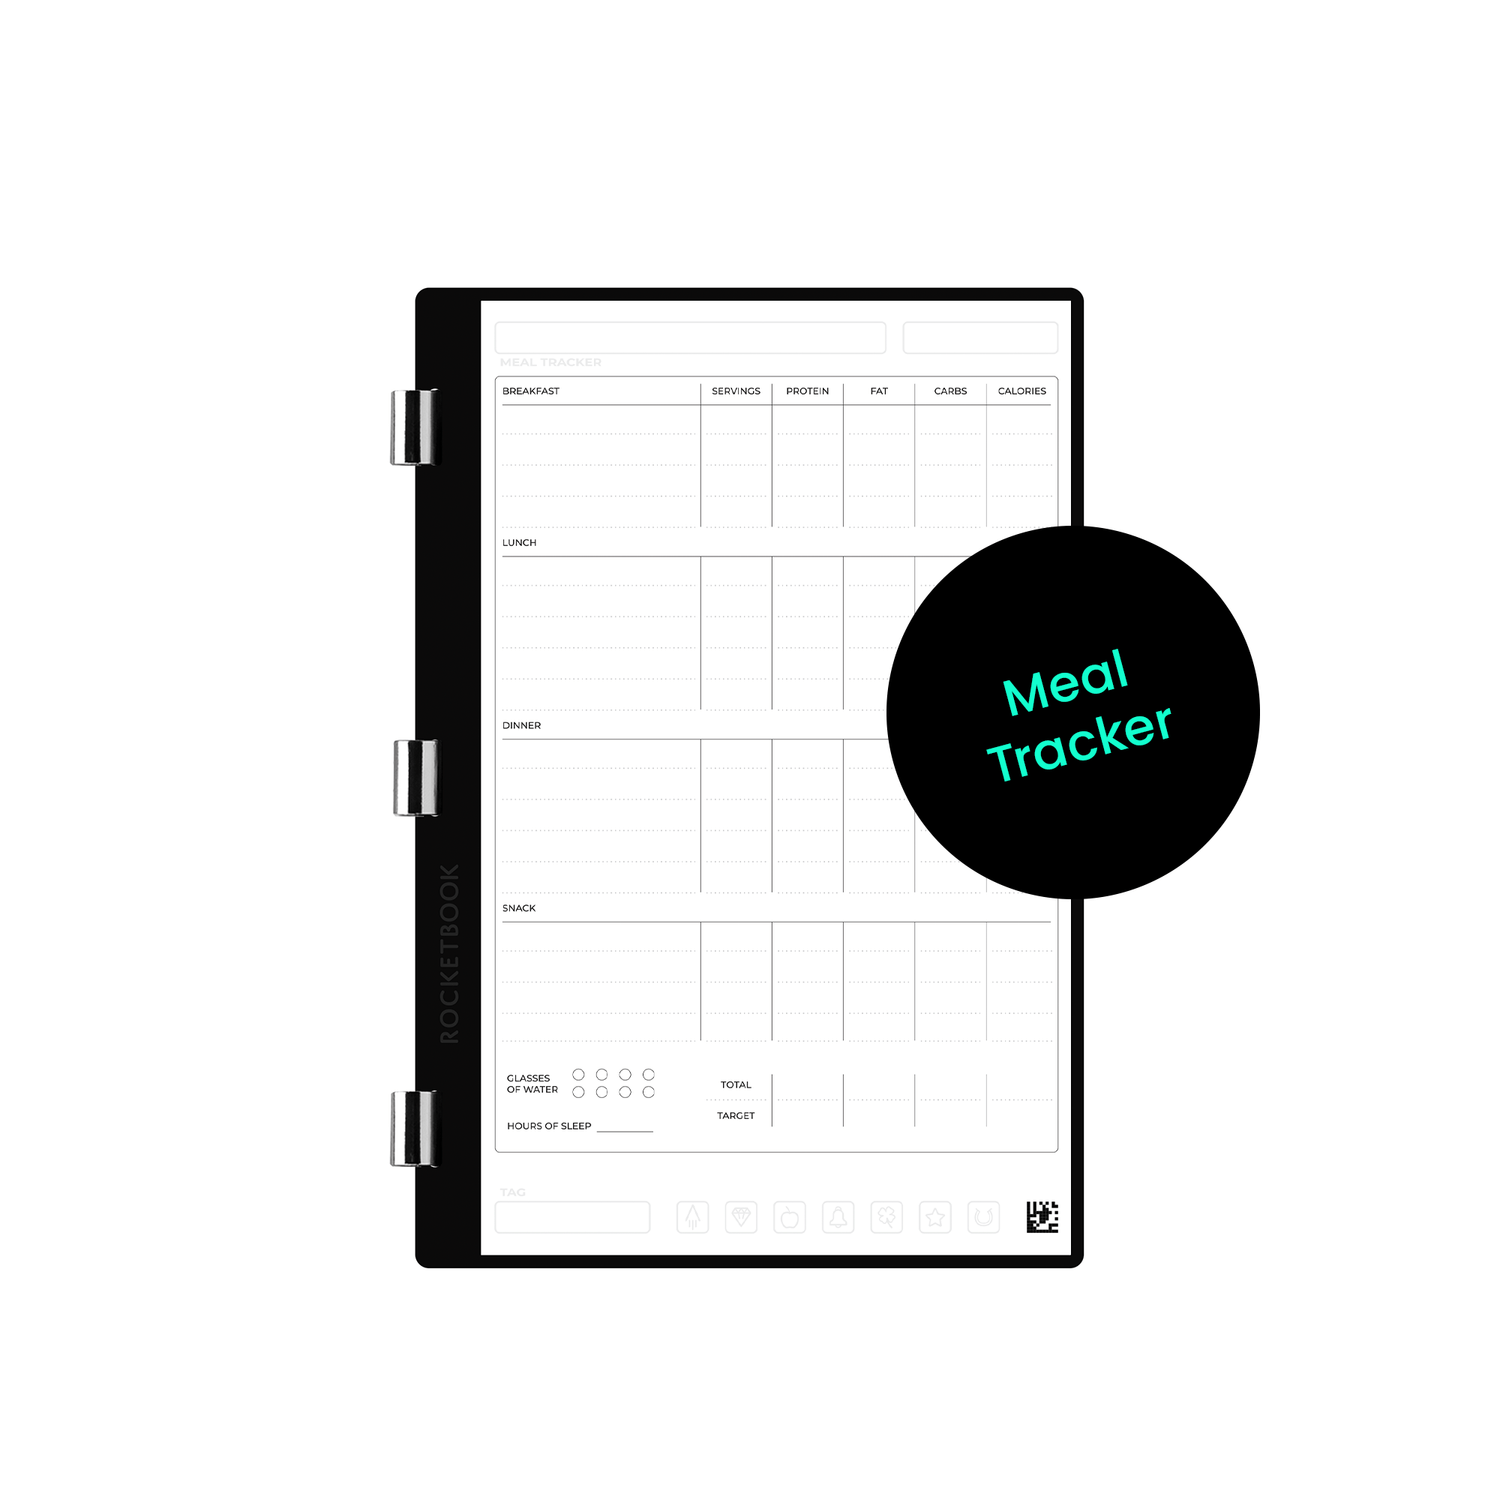 Pilates Forever - Set of 2 Notepads